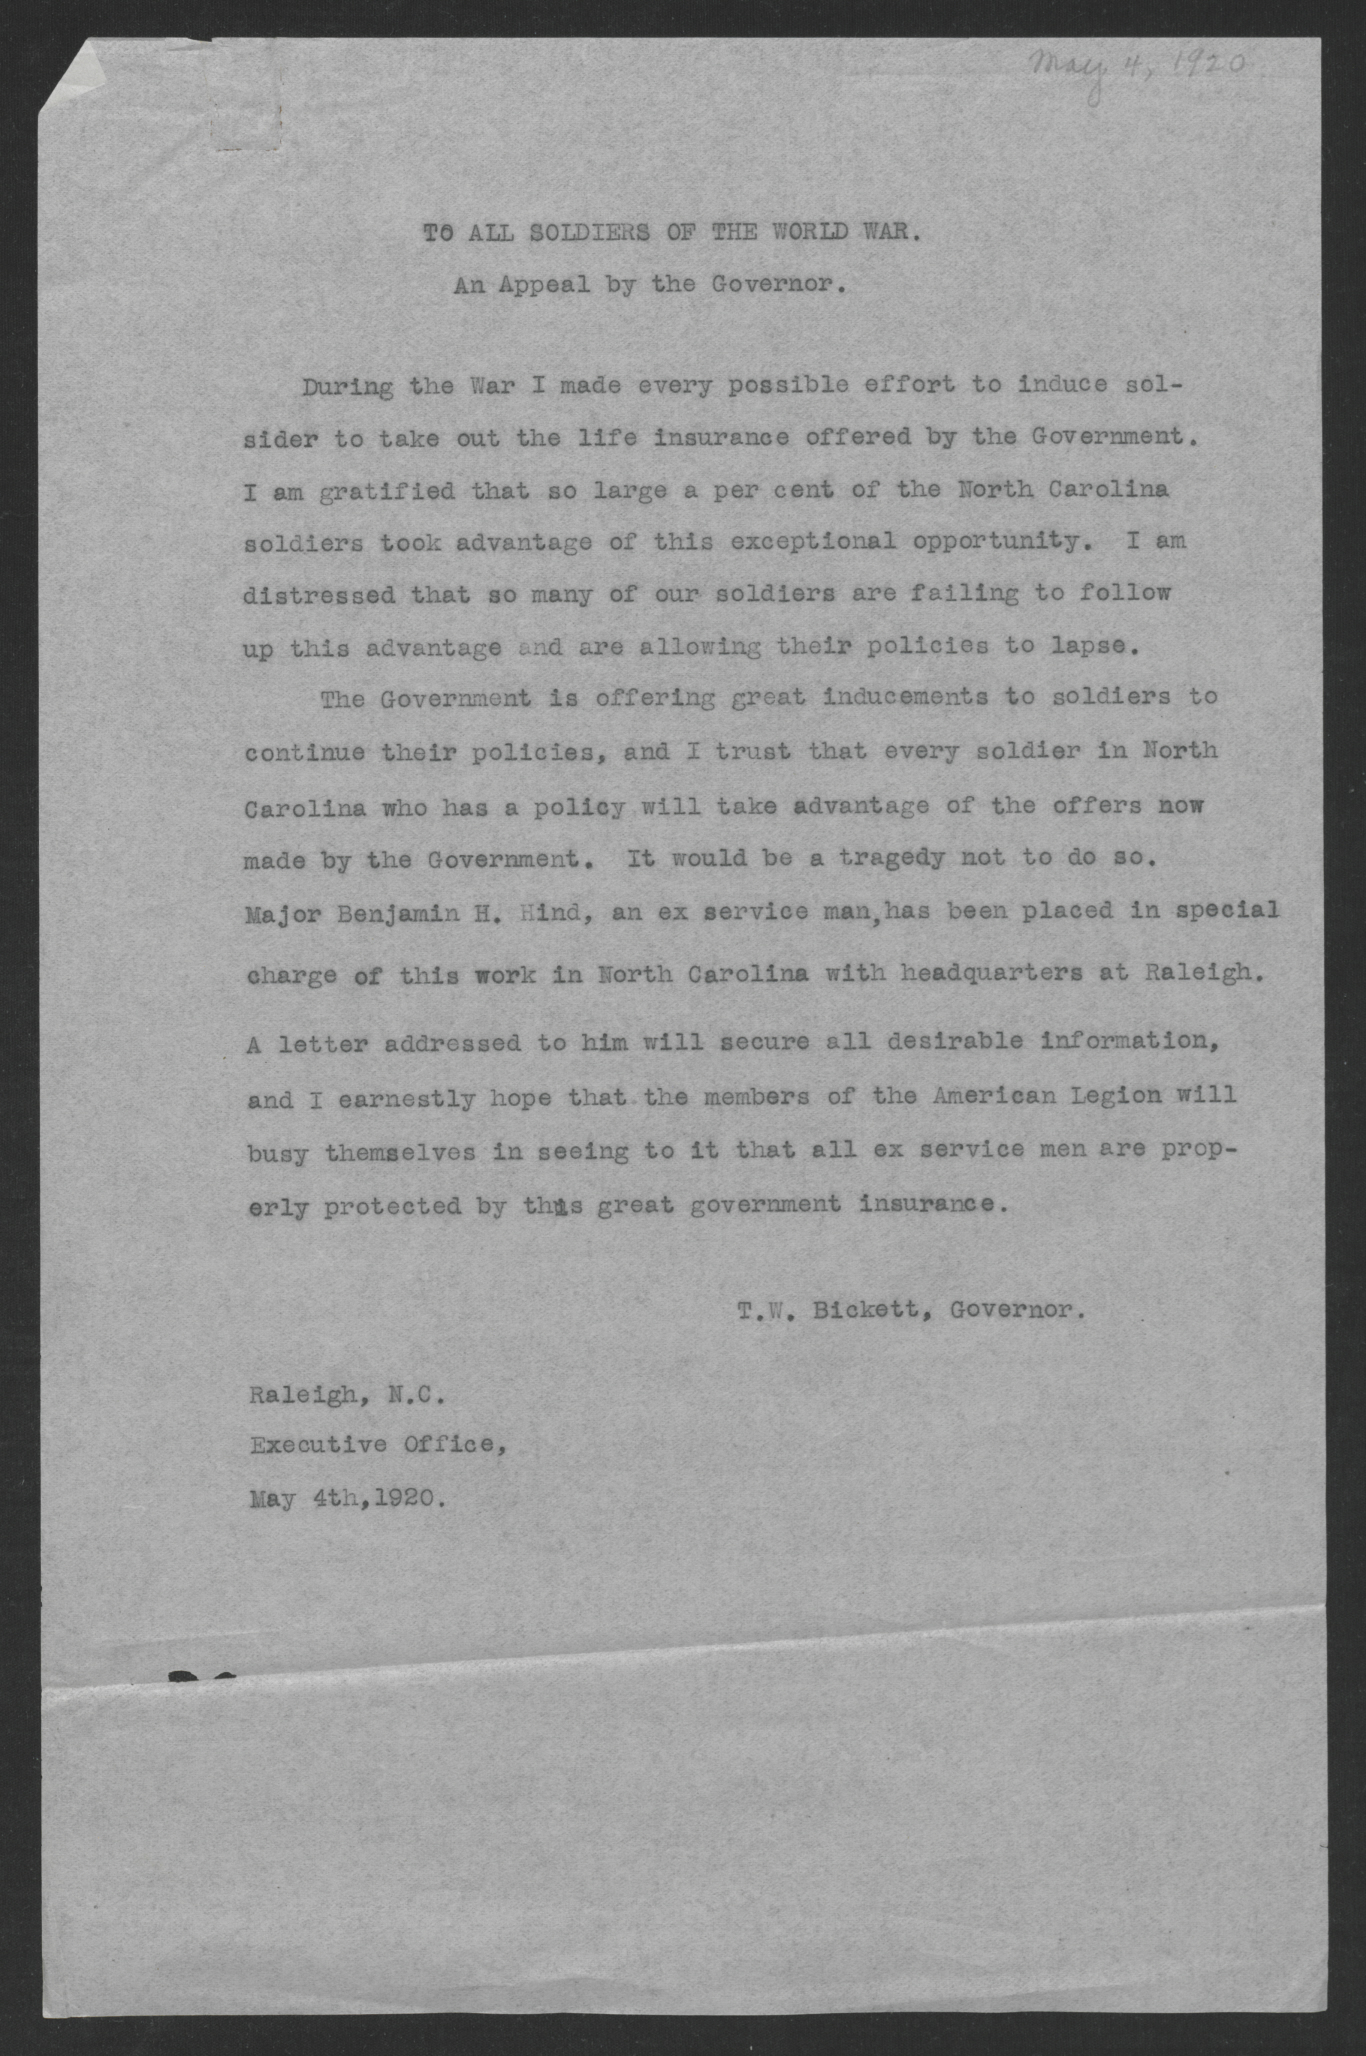 An Appeal to All Soldiers of the World War by Governor Thomas W. Bickett, May 4, 1920